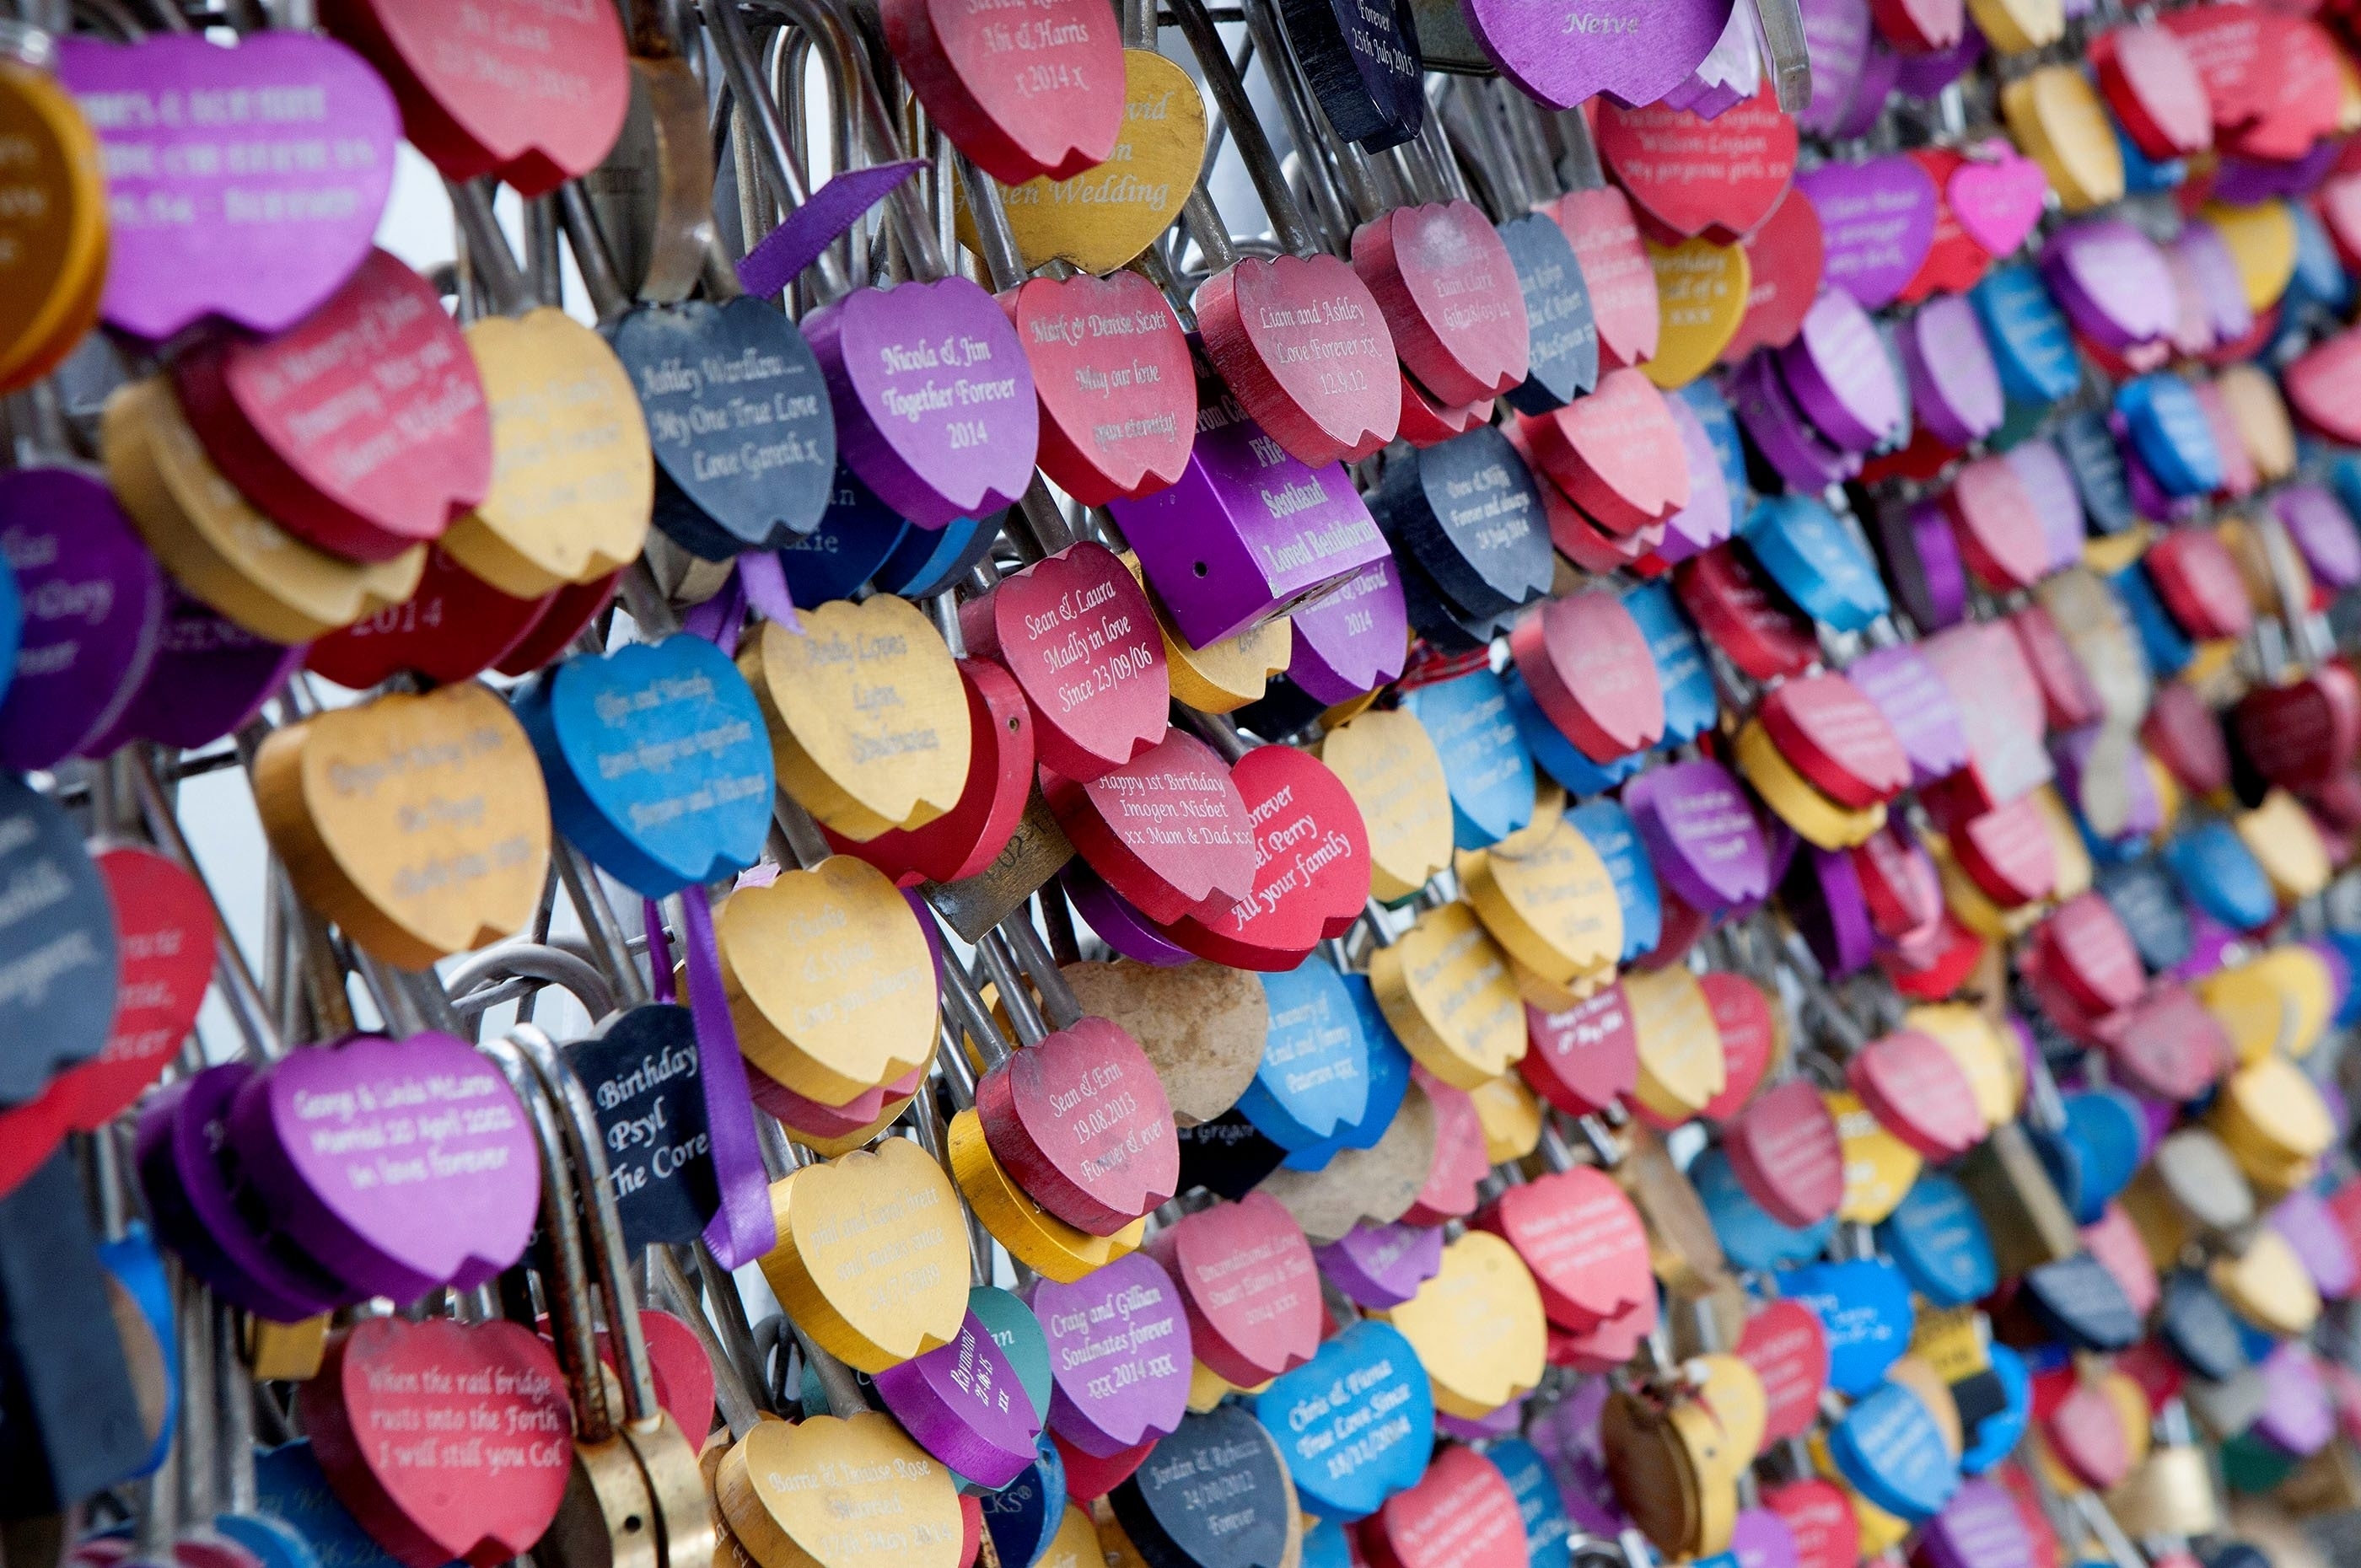 These pictures show a collection of romantic padlocks 